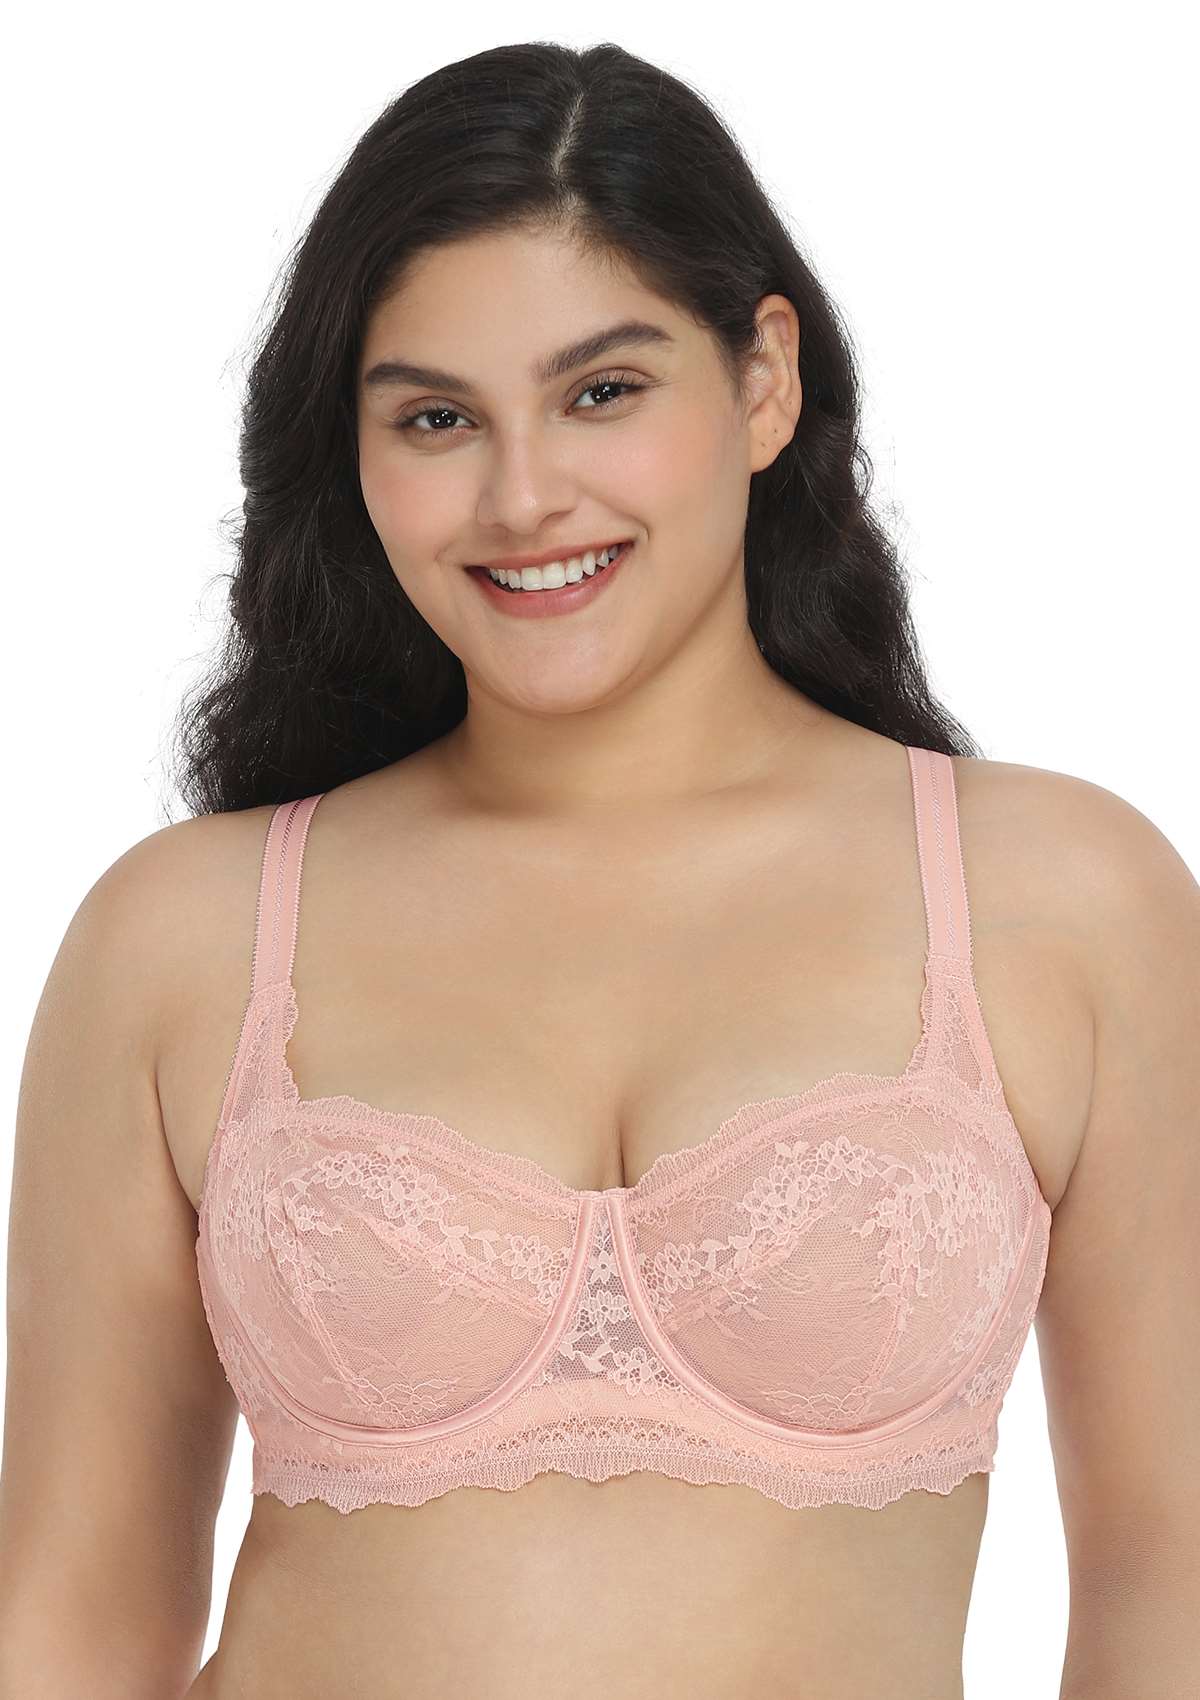 HSIA I Do Floral Lace Bridal Balconette Beautiful Bra For Special Day - Pink / 38 / C